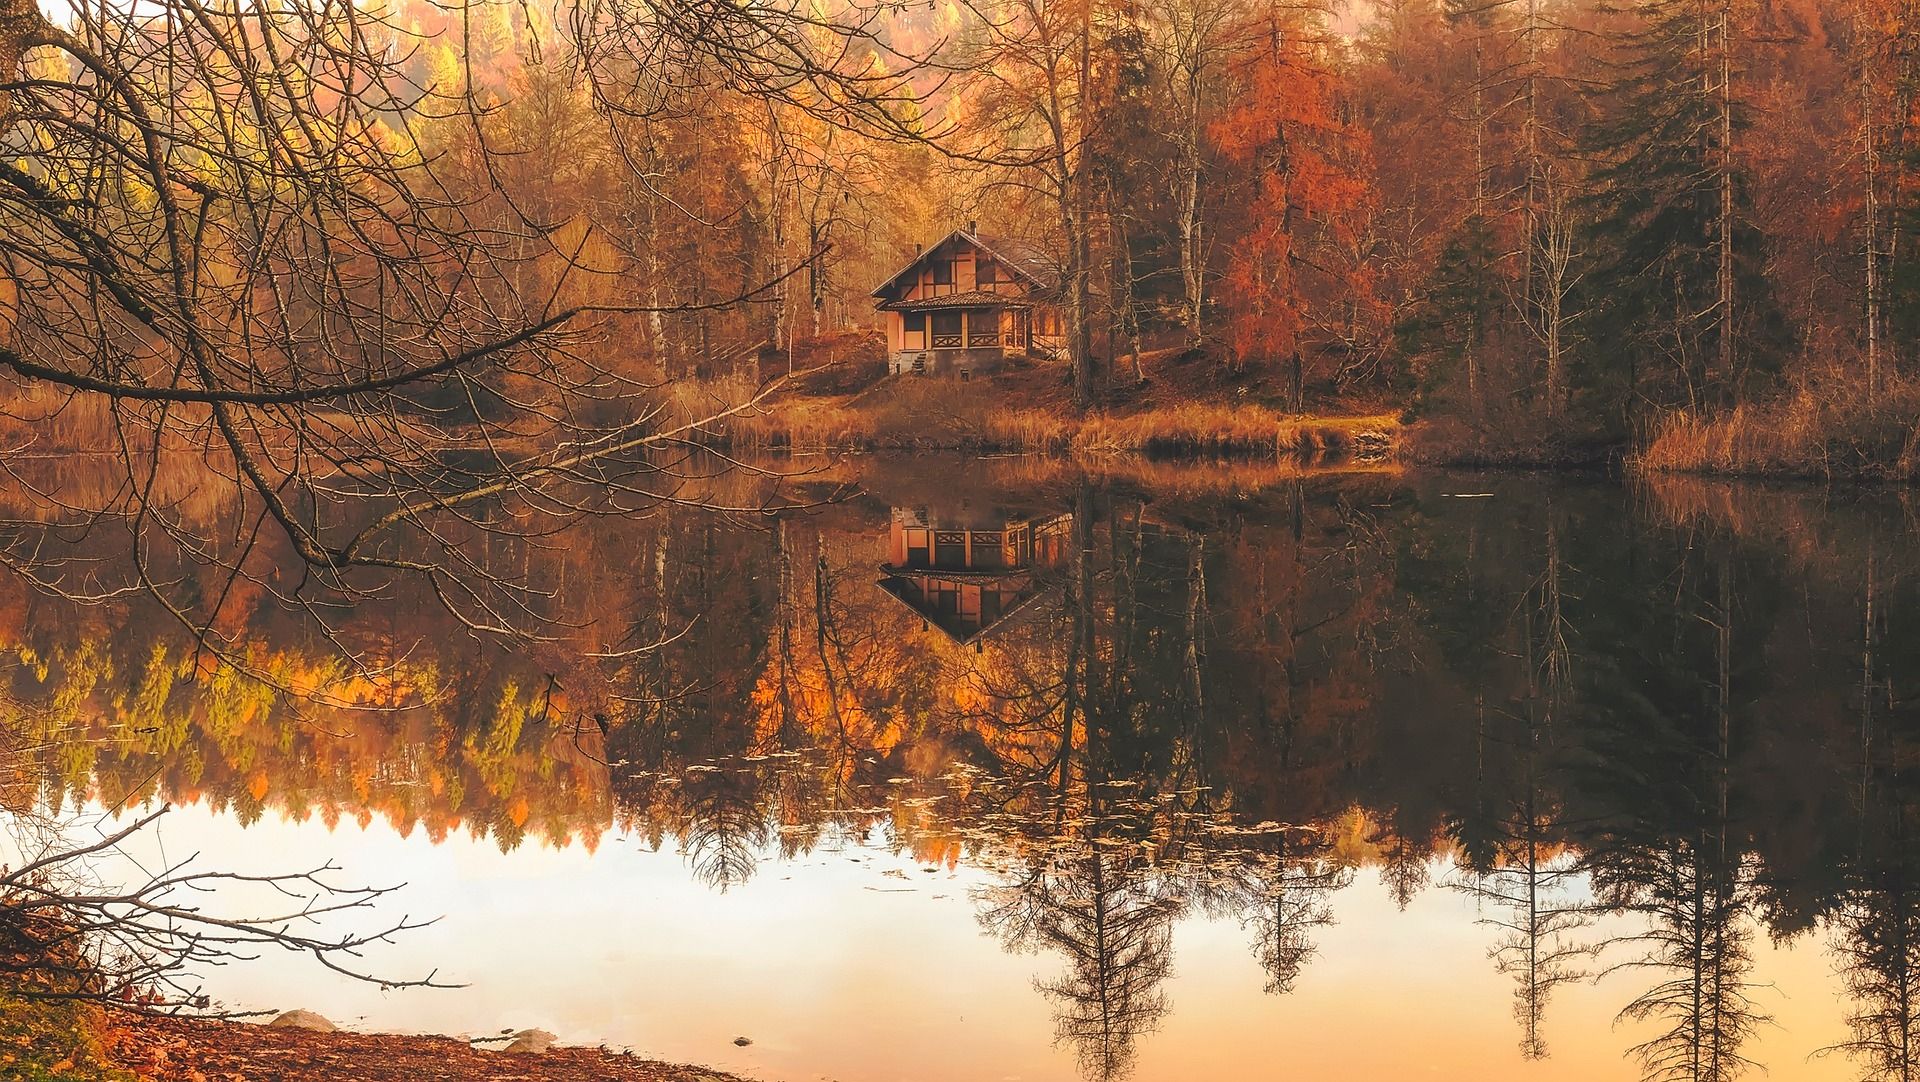 A lake cabin surrounded by autumn colors